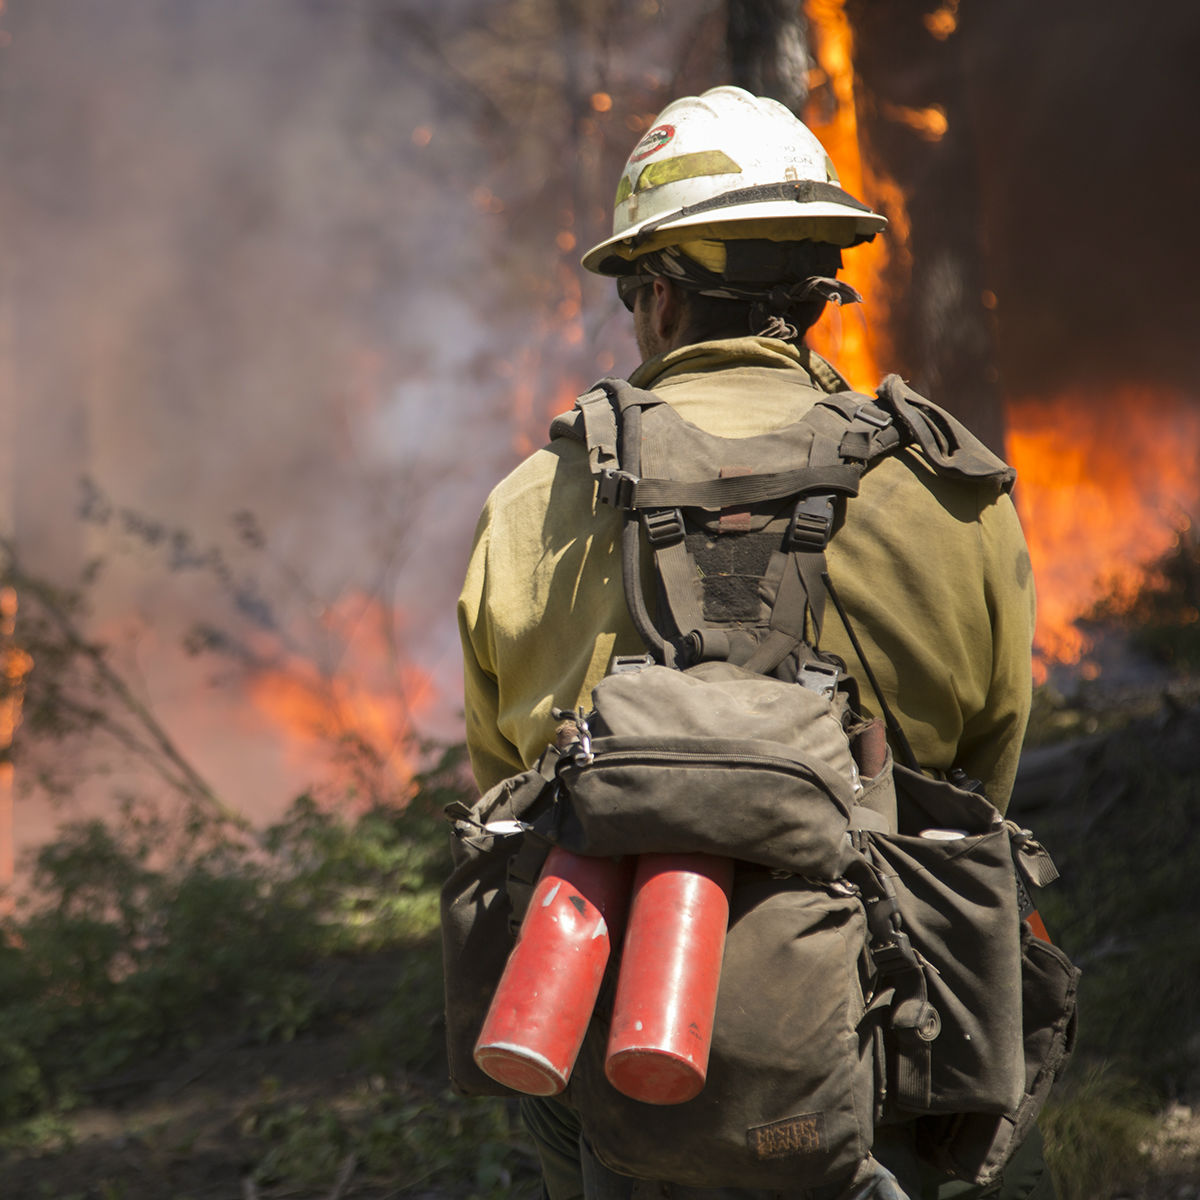 Firefighter standing in front in wildfire.